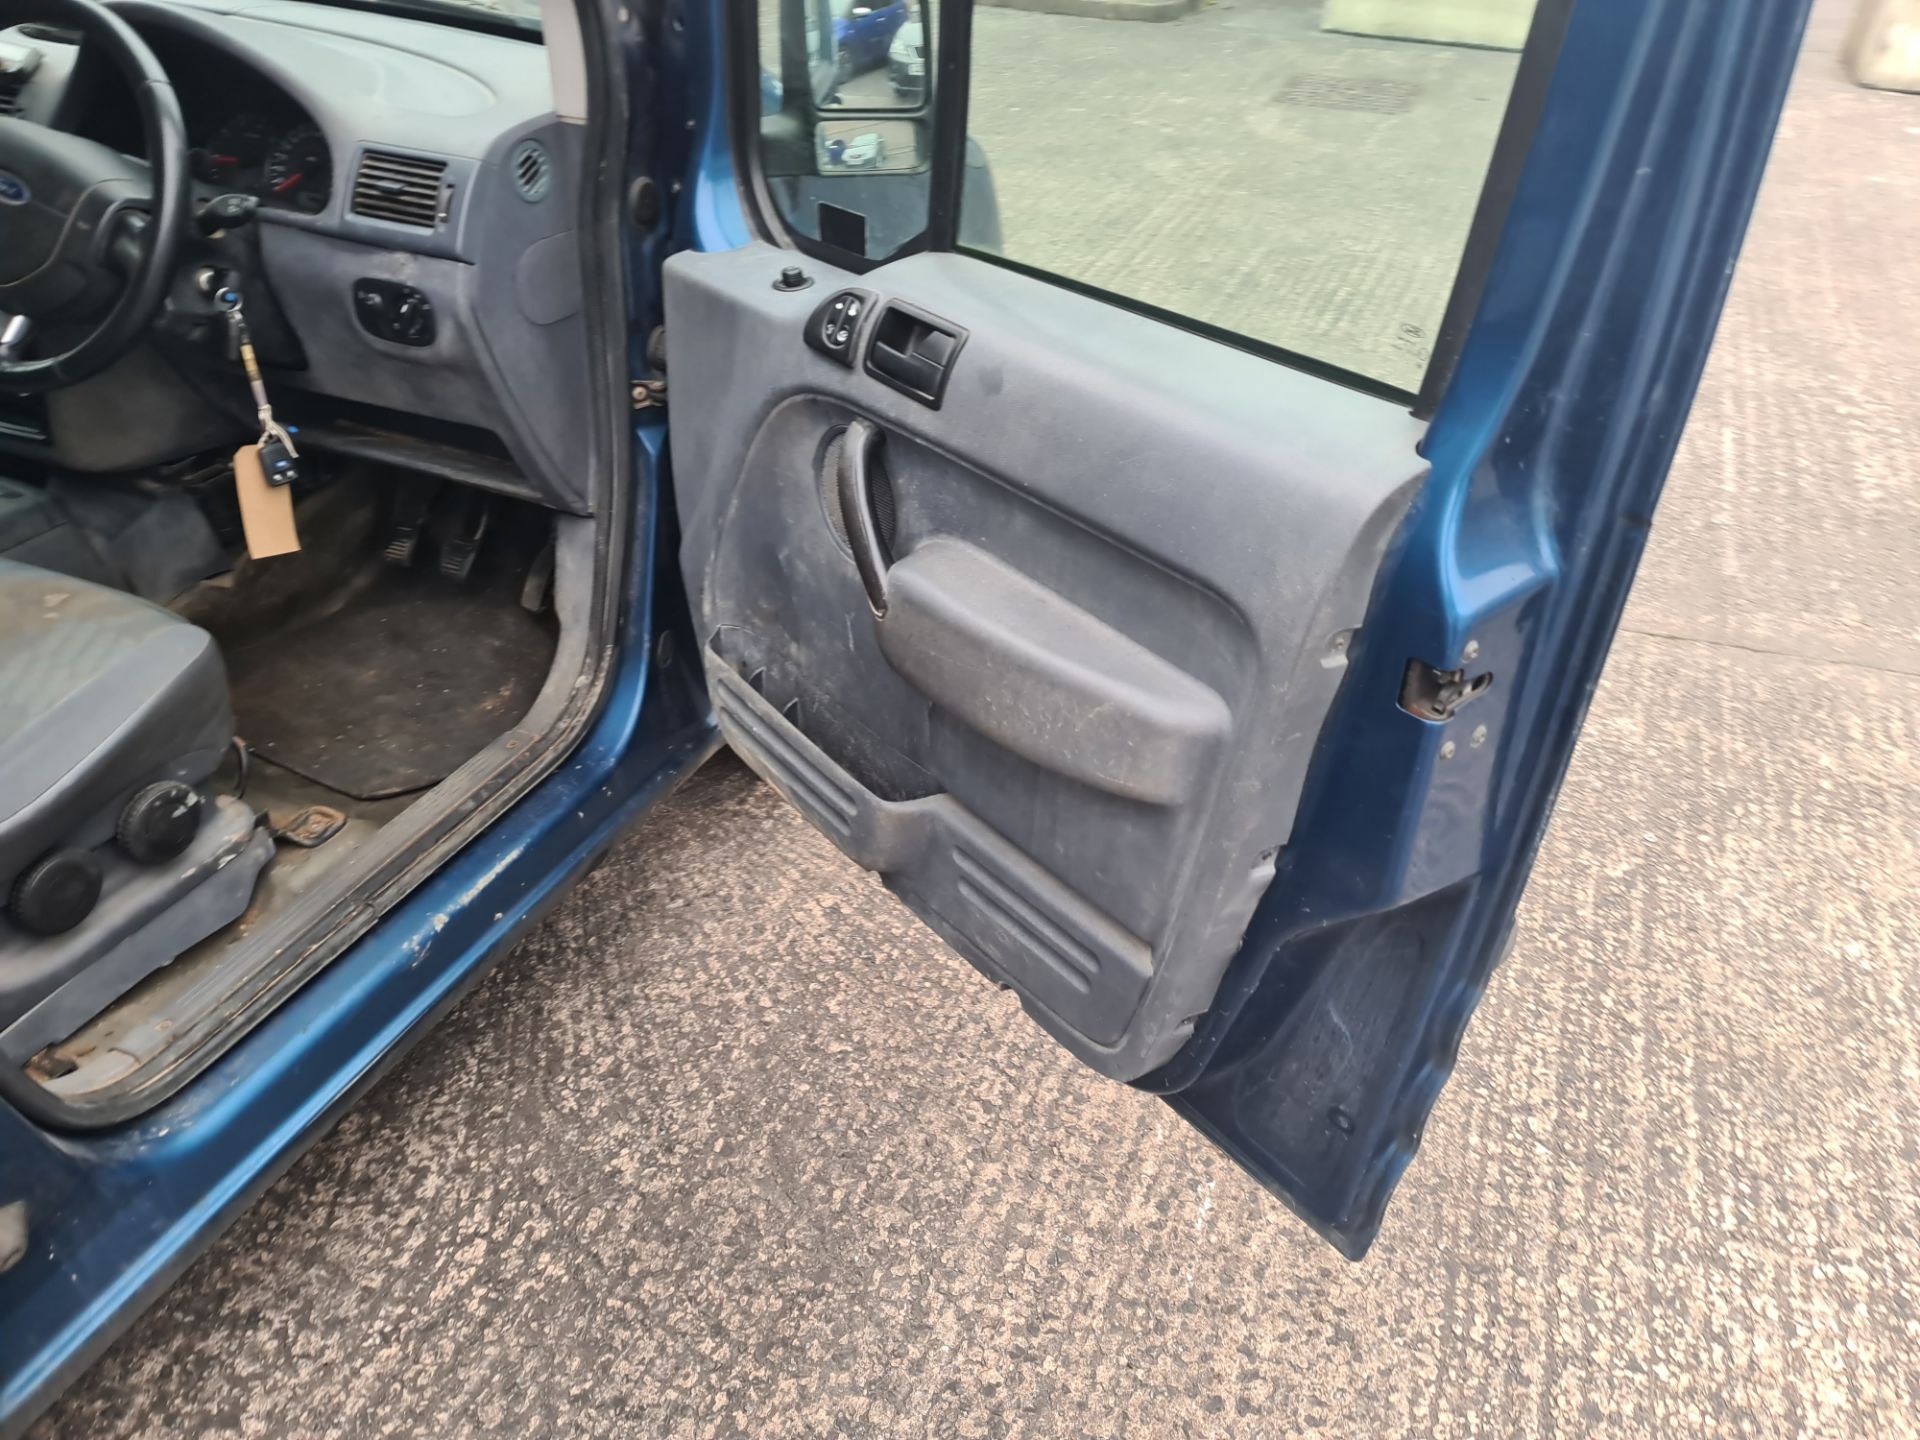 2007 Ford Transit Connect T230 LX90 panel van - Image 10 of 53